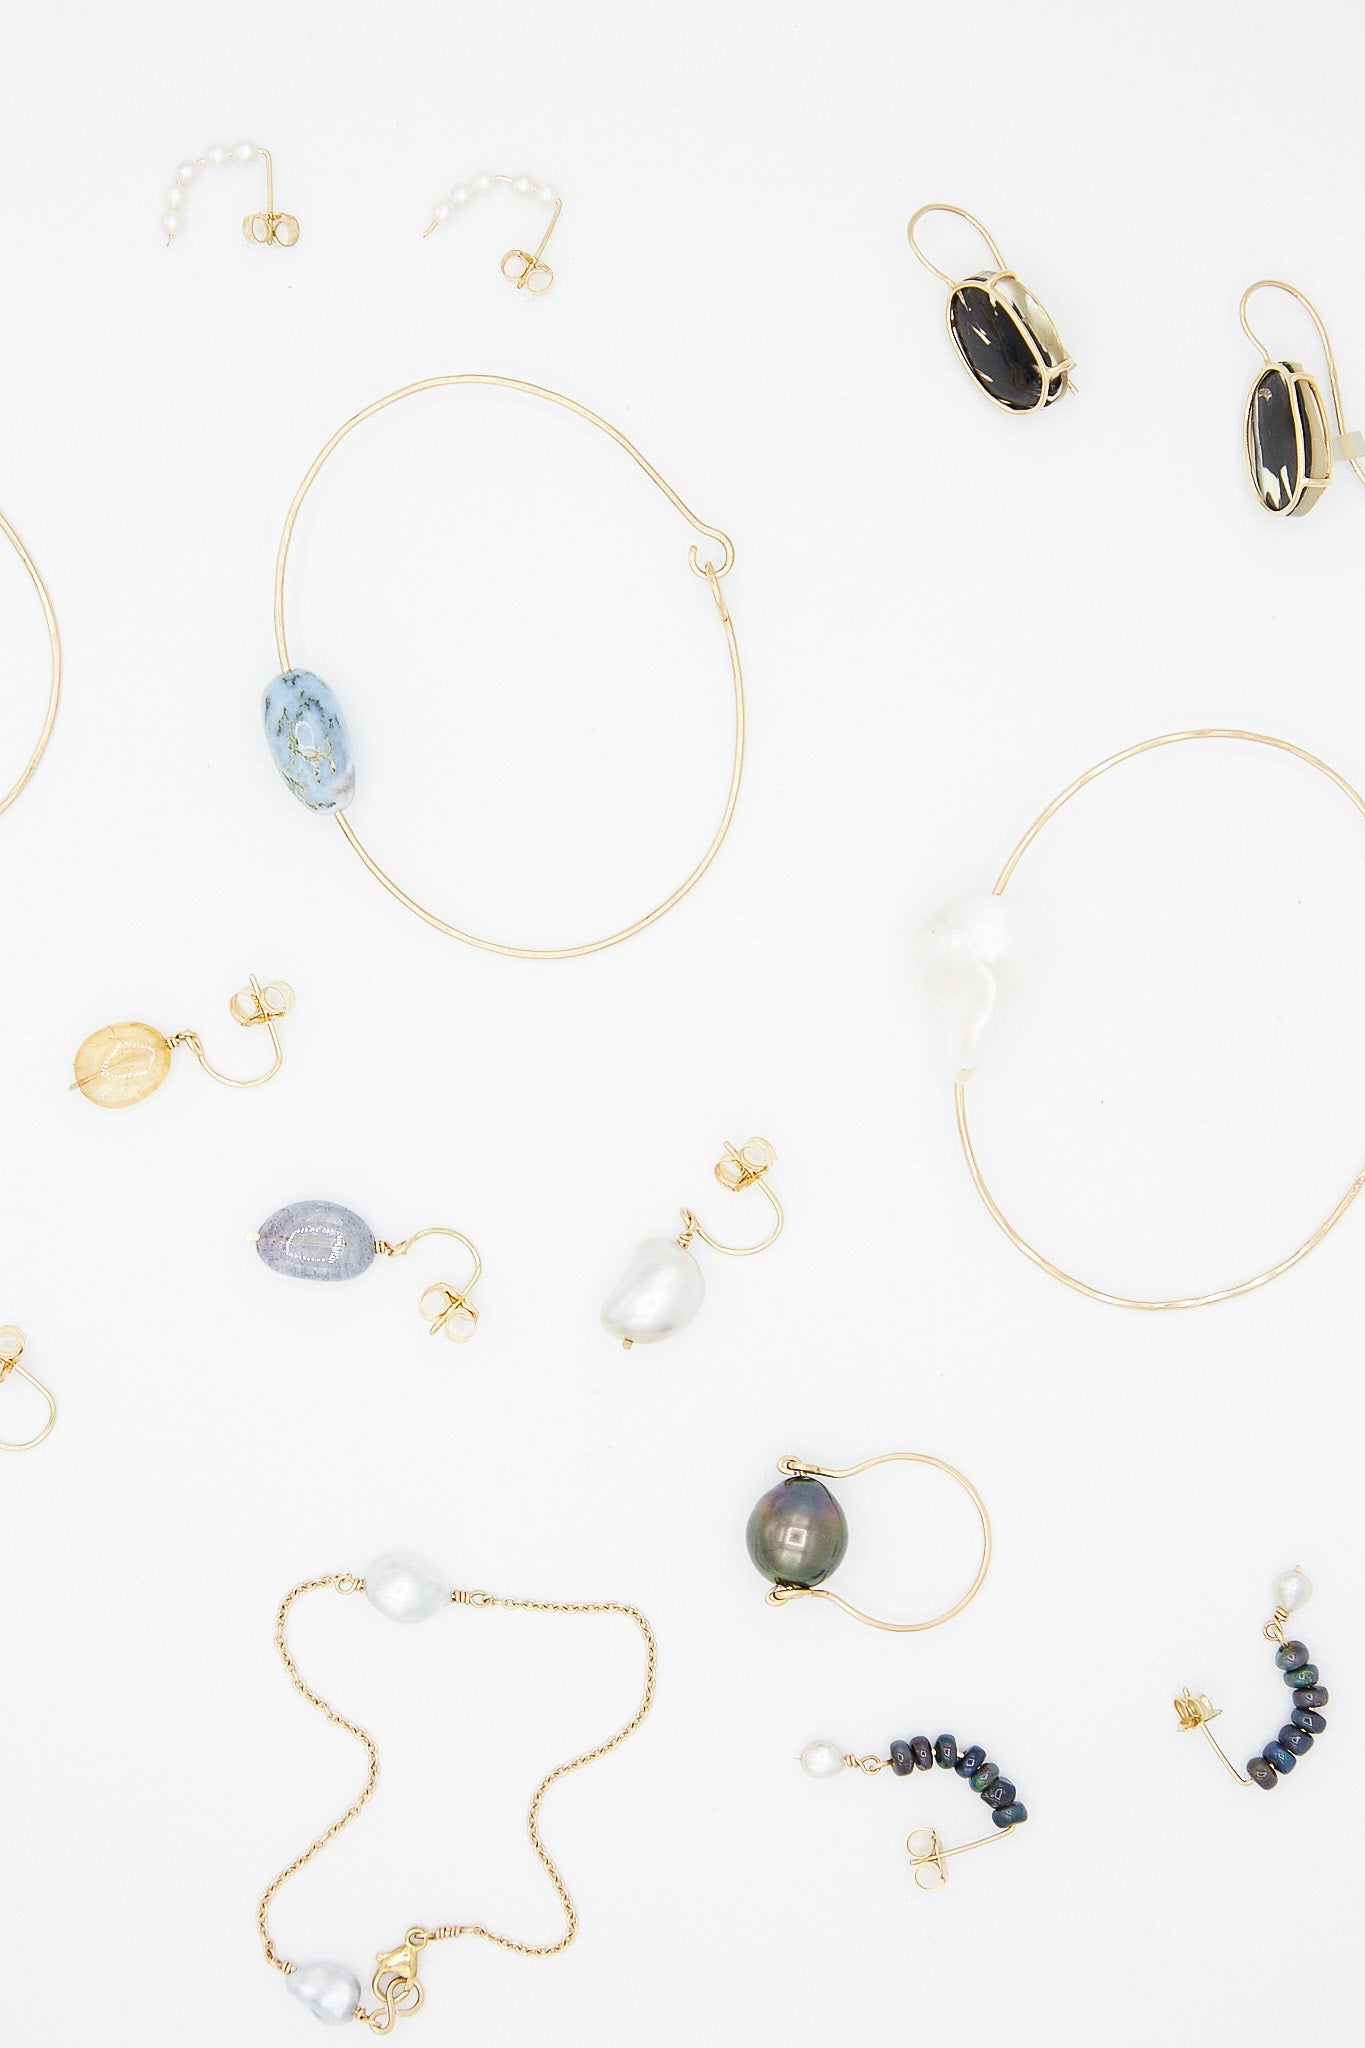 A collection of Mary MacGill Handmade necklaces, 14K Floating Drop Earrings in Cowrie Shell, and bracelets featuring Cowrie Shell and 14K Gold accents.